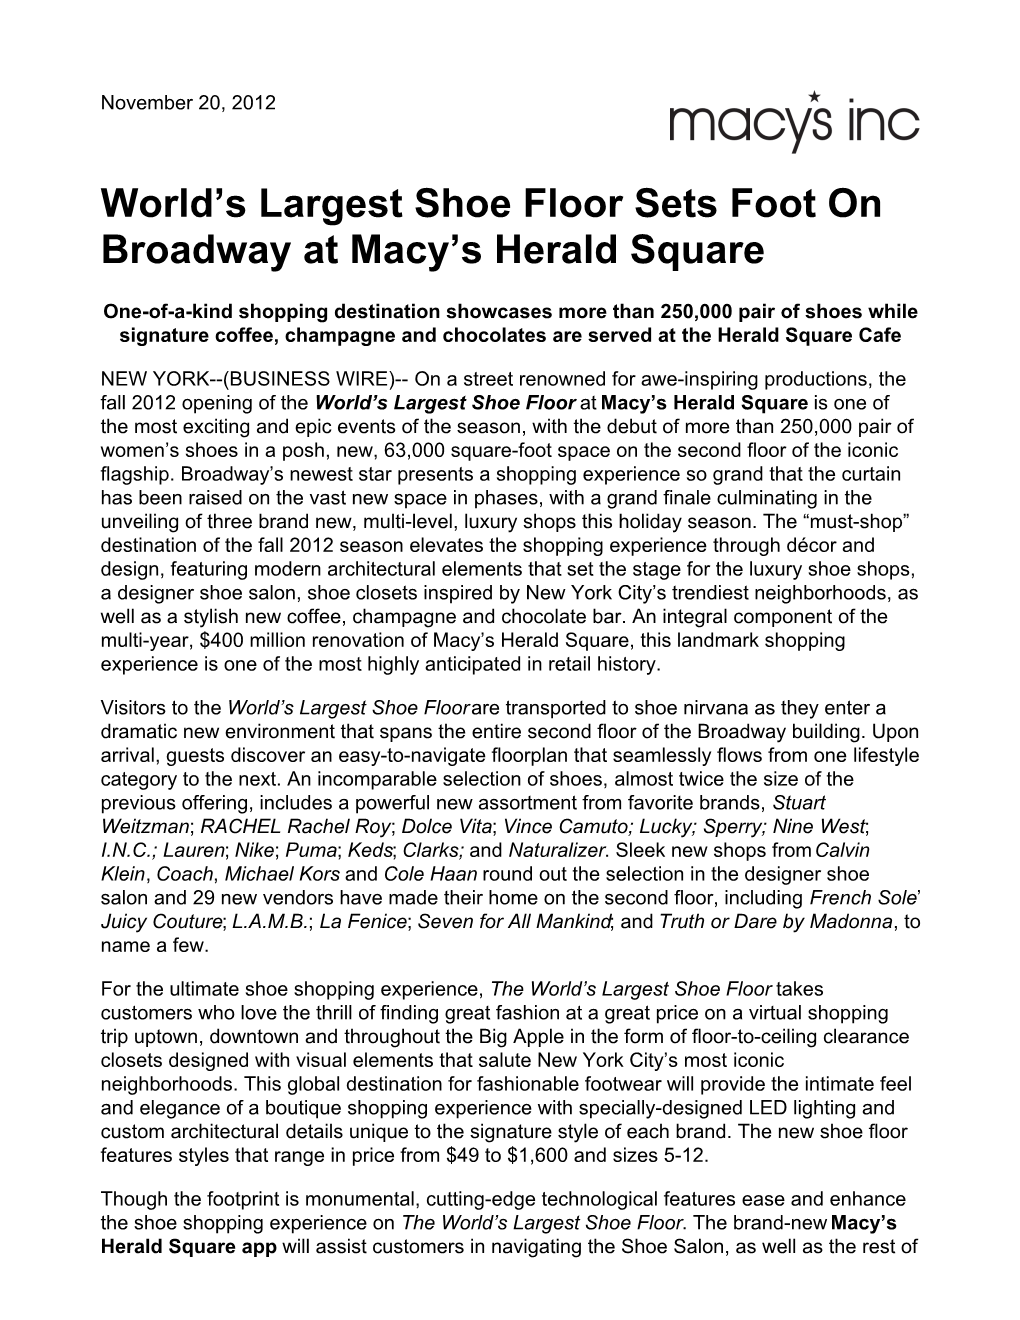 World's Largest Shoe Floor Sets Foot on Broadway at Macy's Herald